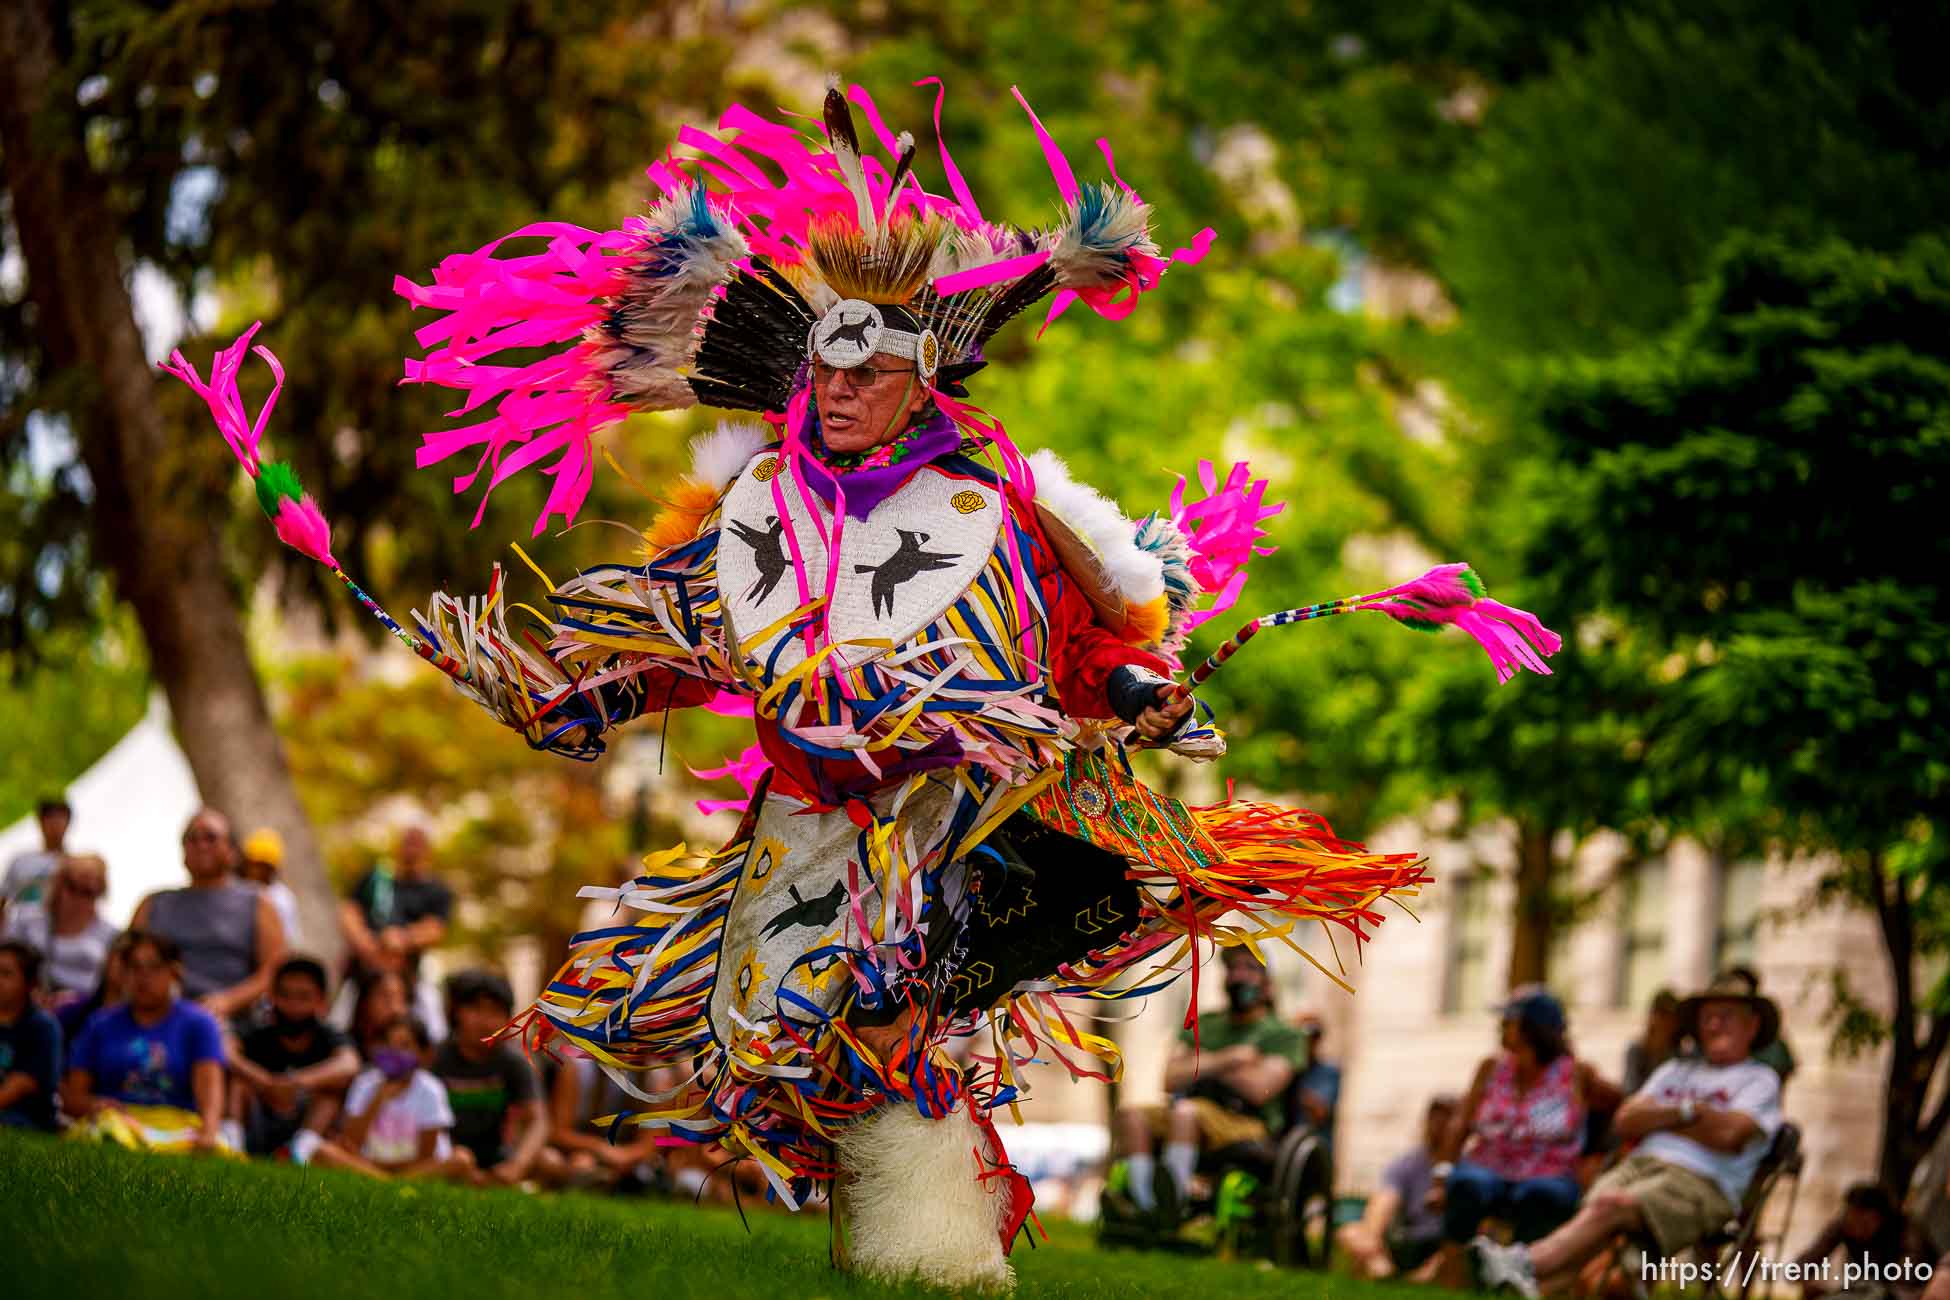 (Trent Nelson  |  The Salt Lake Tribune) Shon Taylor performs a fancy dance during an intertribal pow wow at the Living Traditions festival in Salt Lake City on Saturday, June 26, 2021.